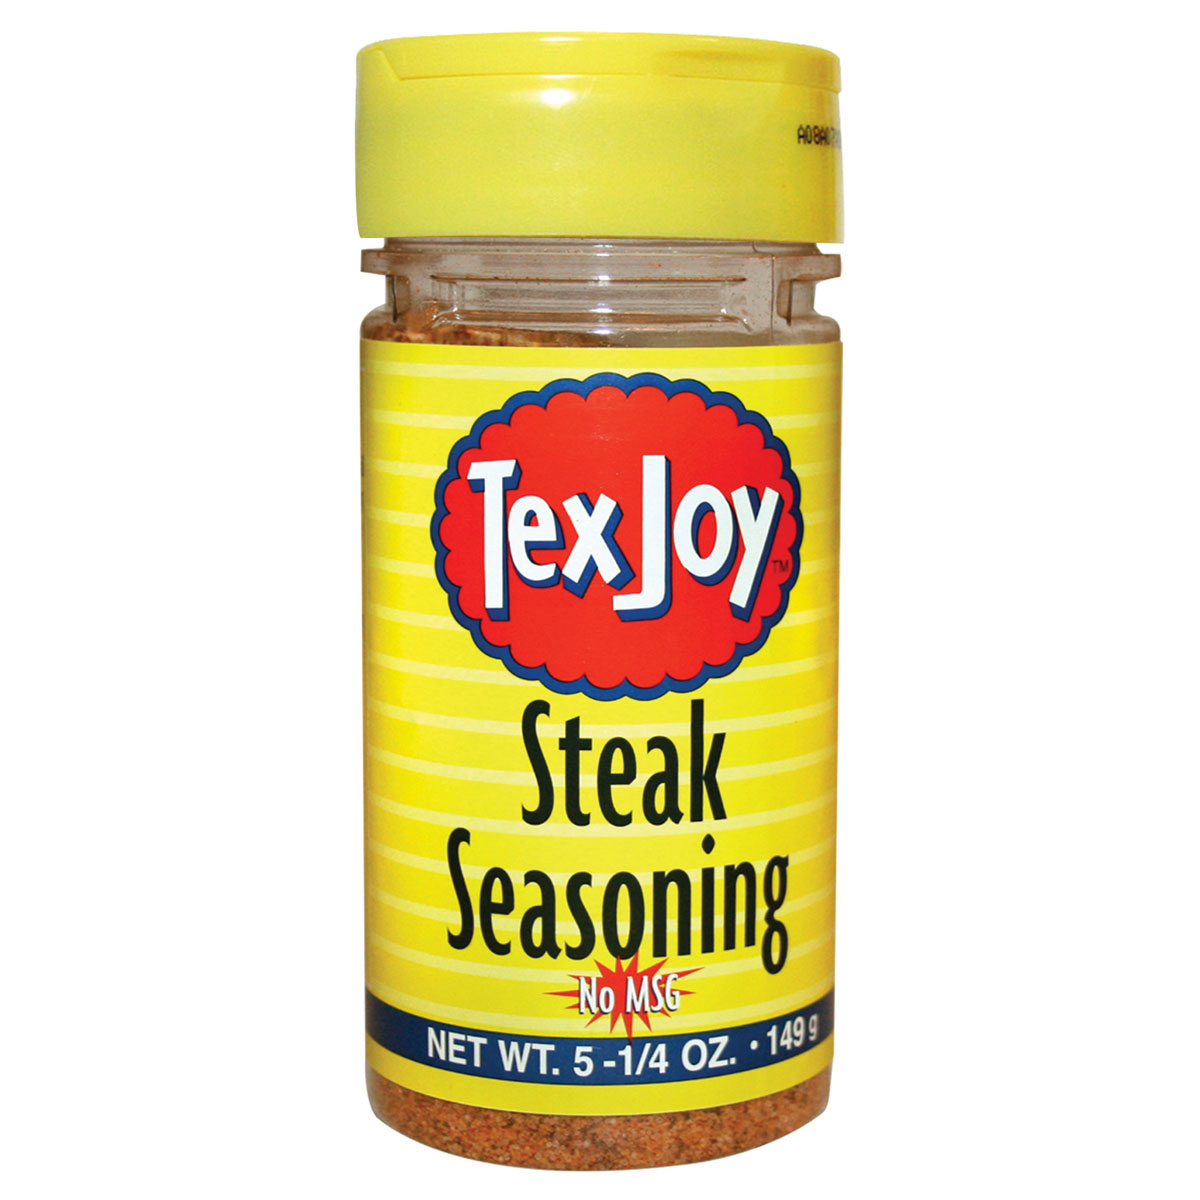 http://www.texjoy.com/Shared/Images/Product/Steak-Seasoning-5-25-oz/texjoy_steak_seasoning_525oz.jpg